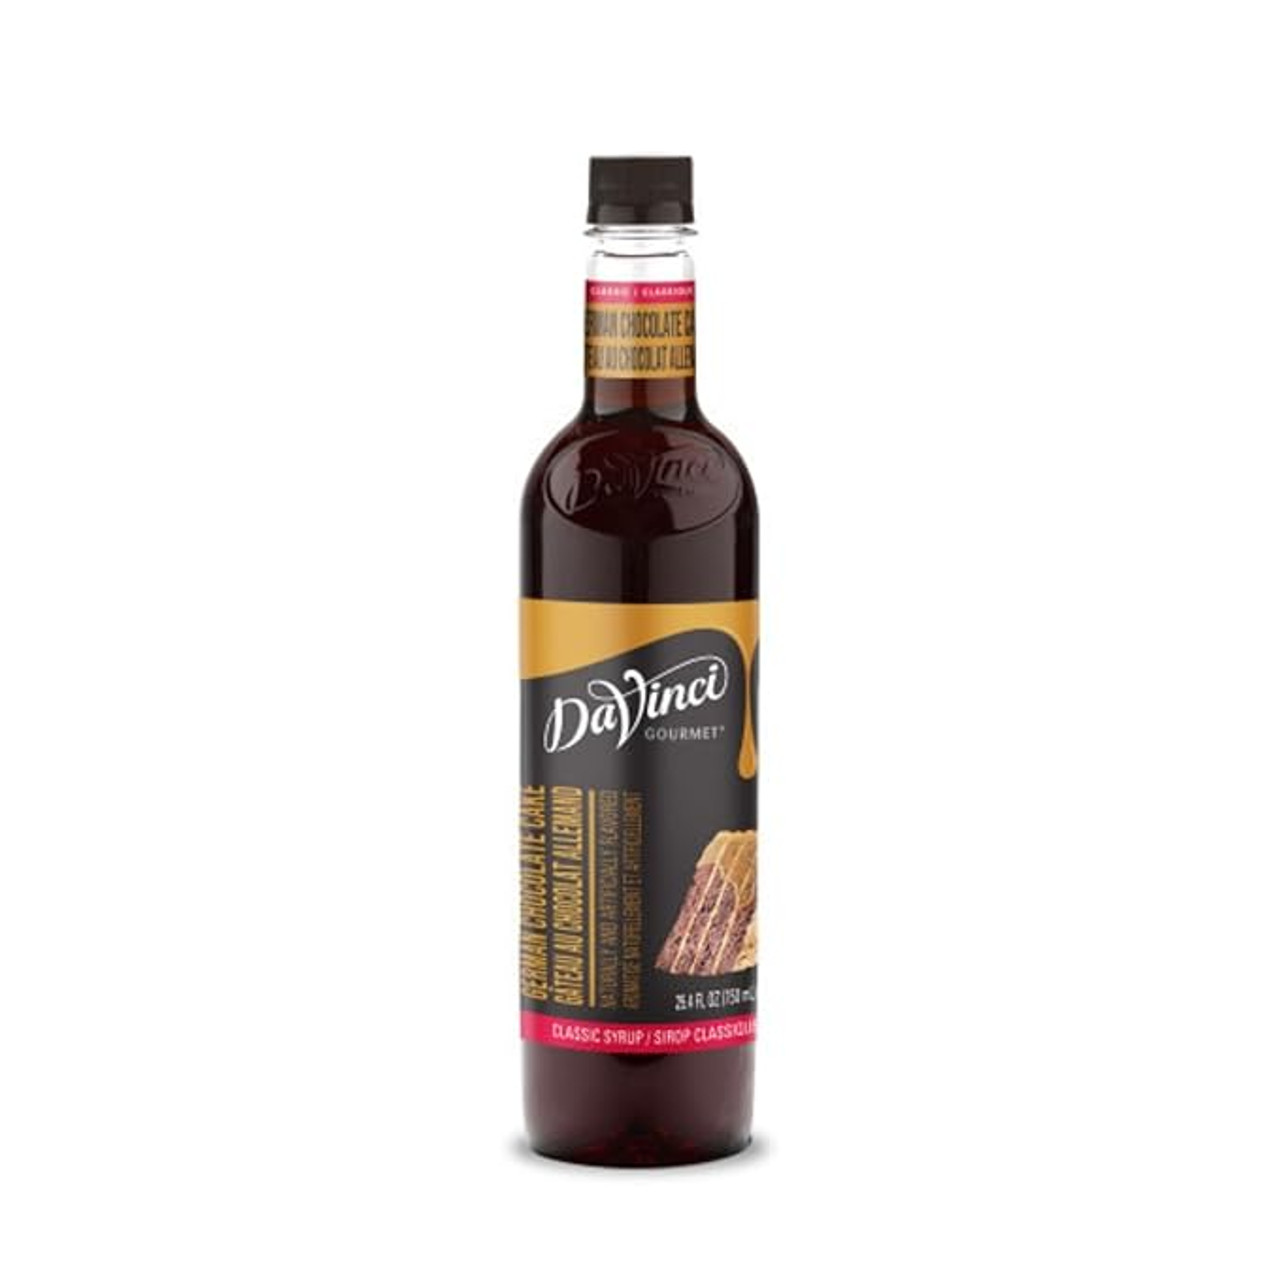 DaVinci Gourmet Classic German Chocolate Cake Pure Cane Flavoring Syrup 750 mL - Chicken Pieces